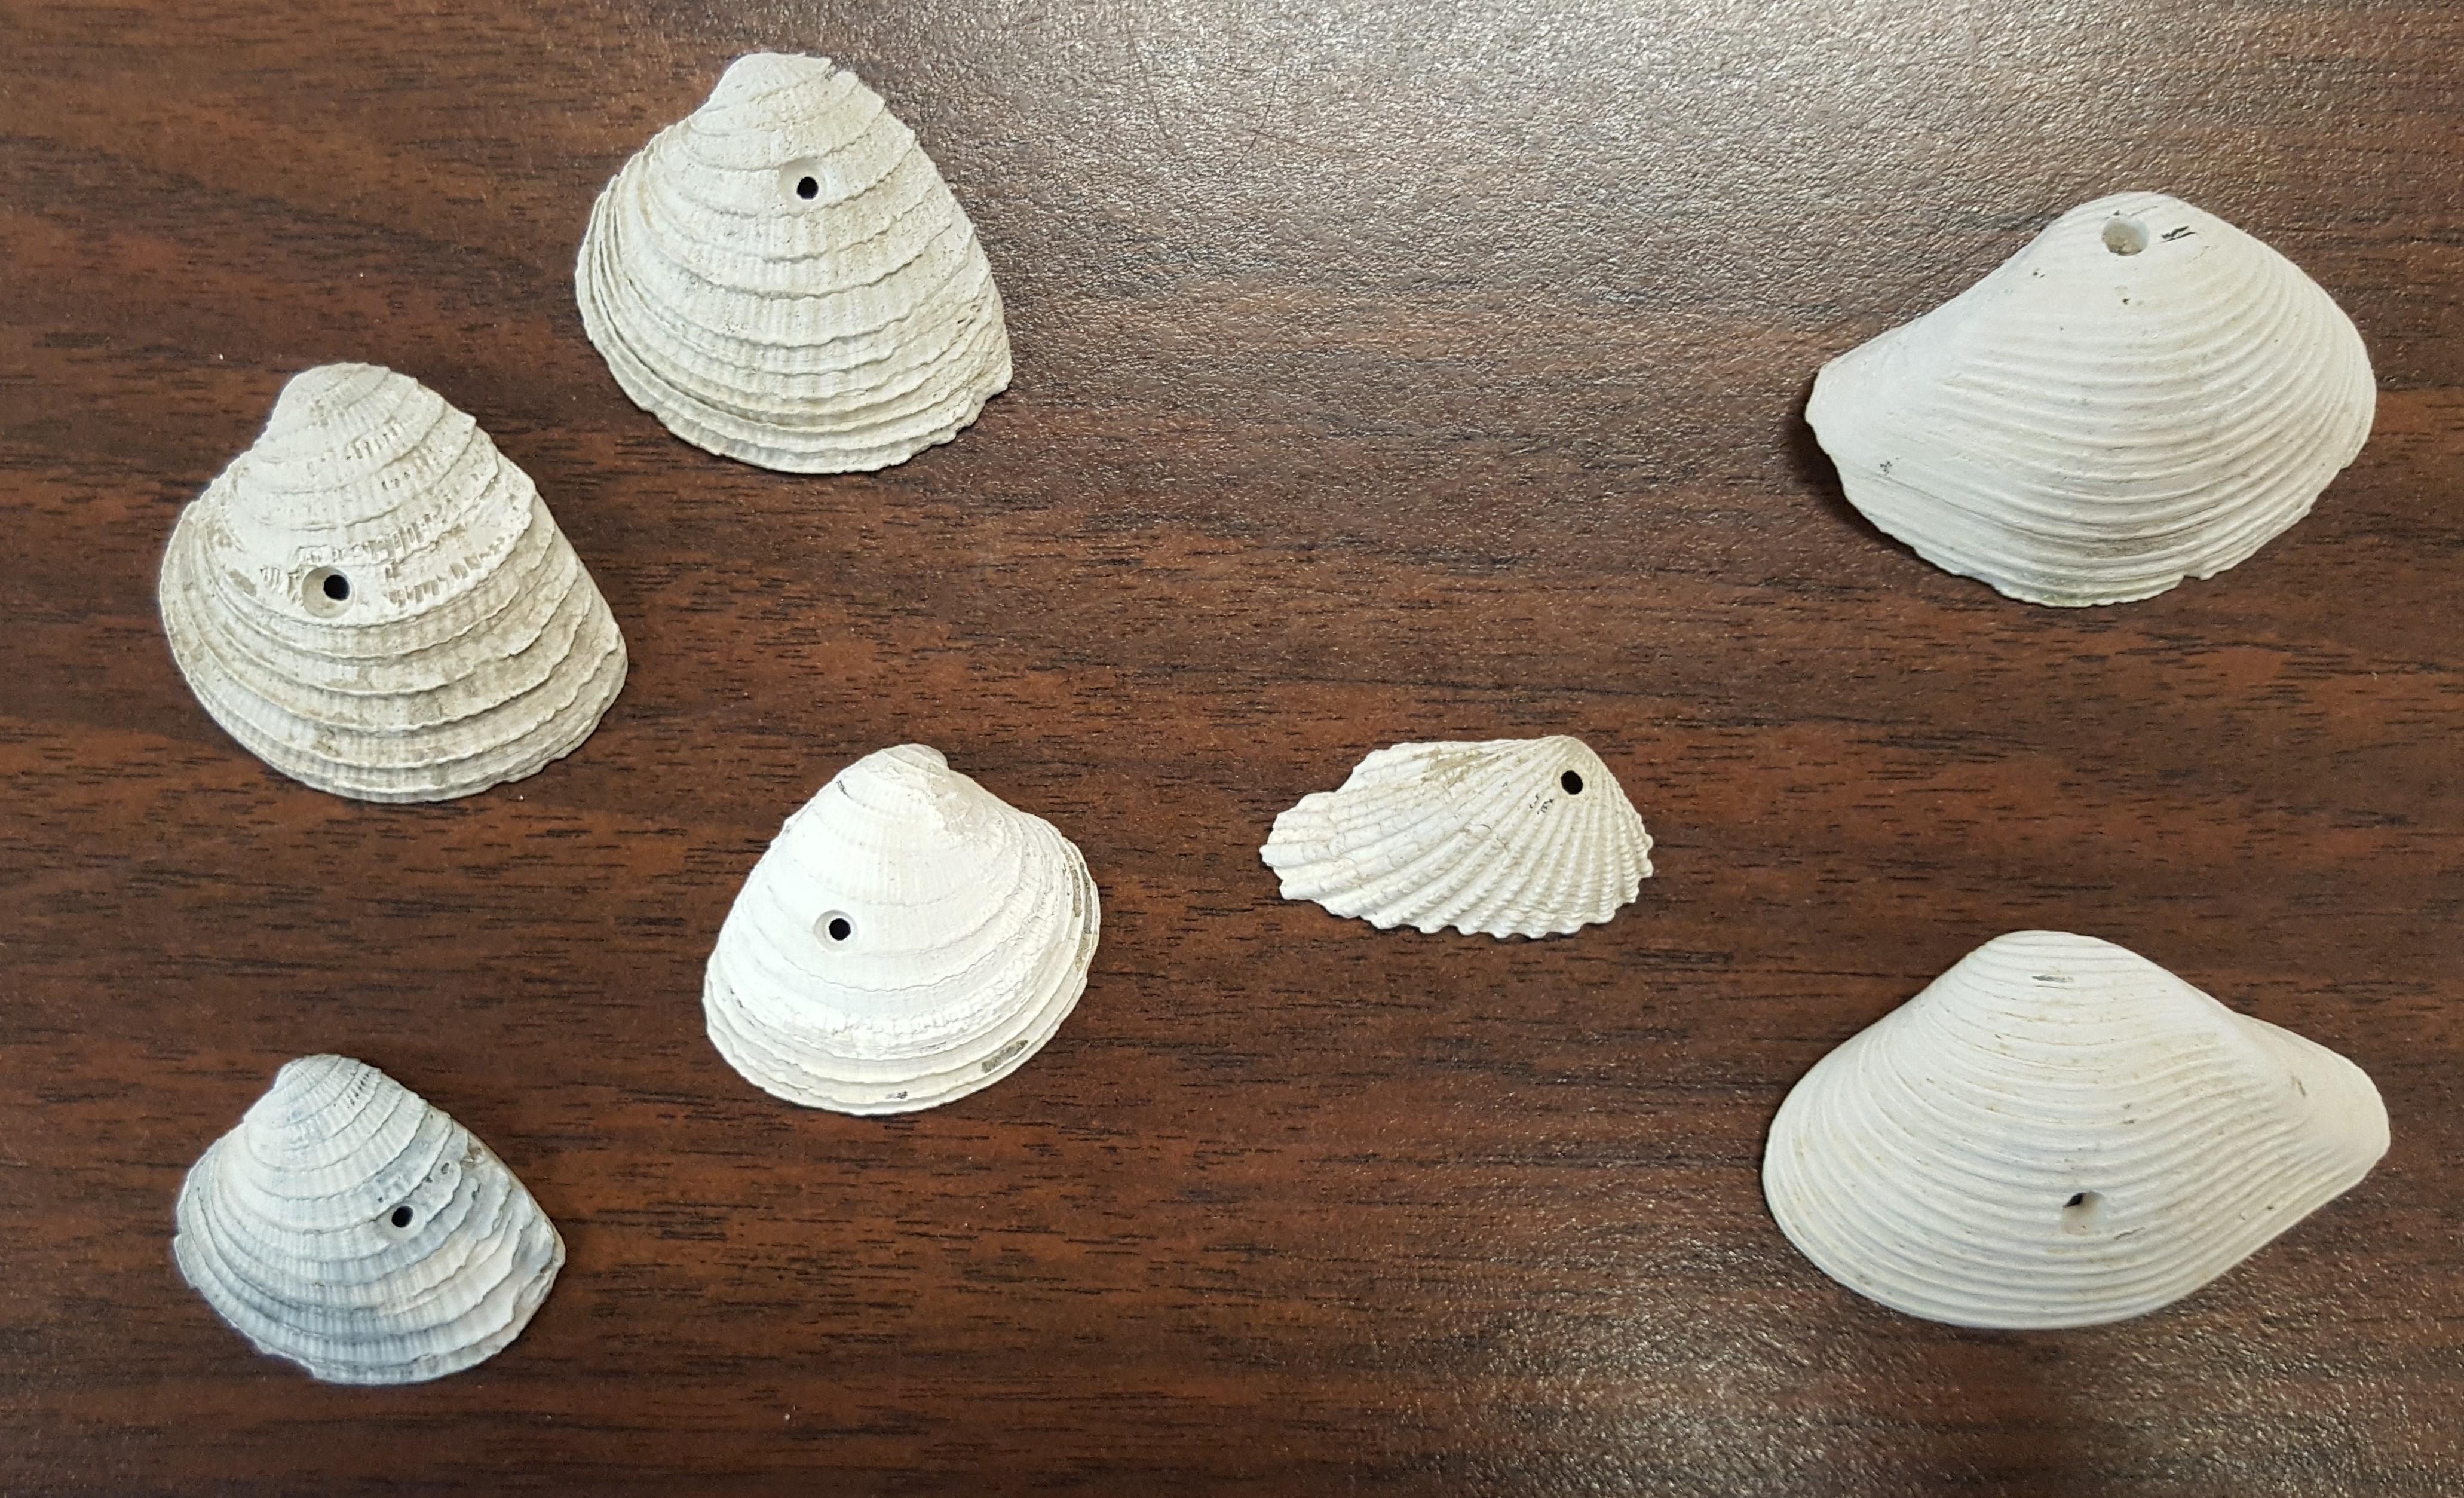 A shot of several fossil clam valves all with beveled holes through them from a shell drilling snail predator.